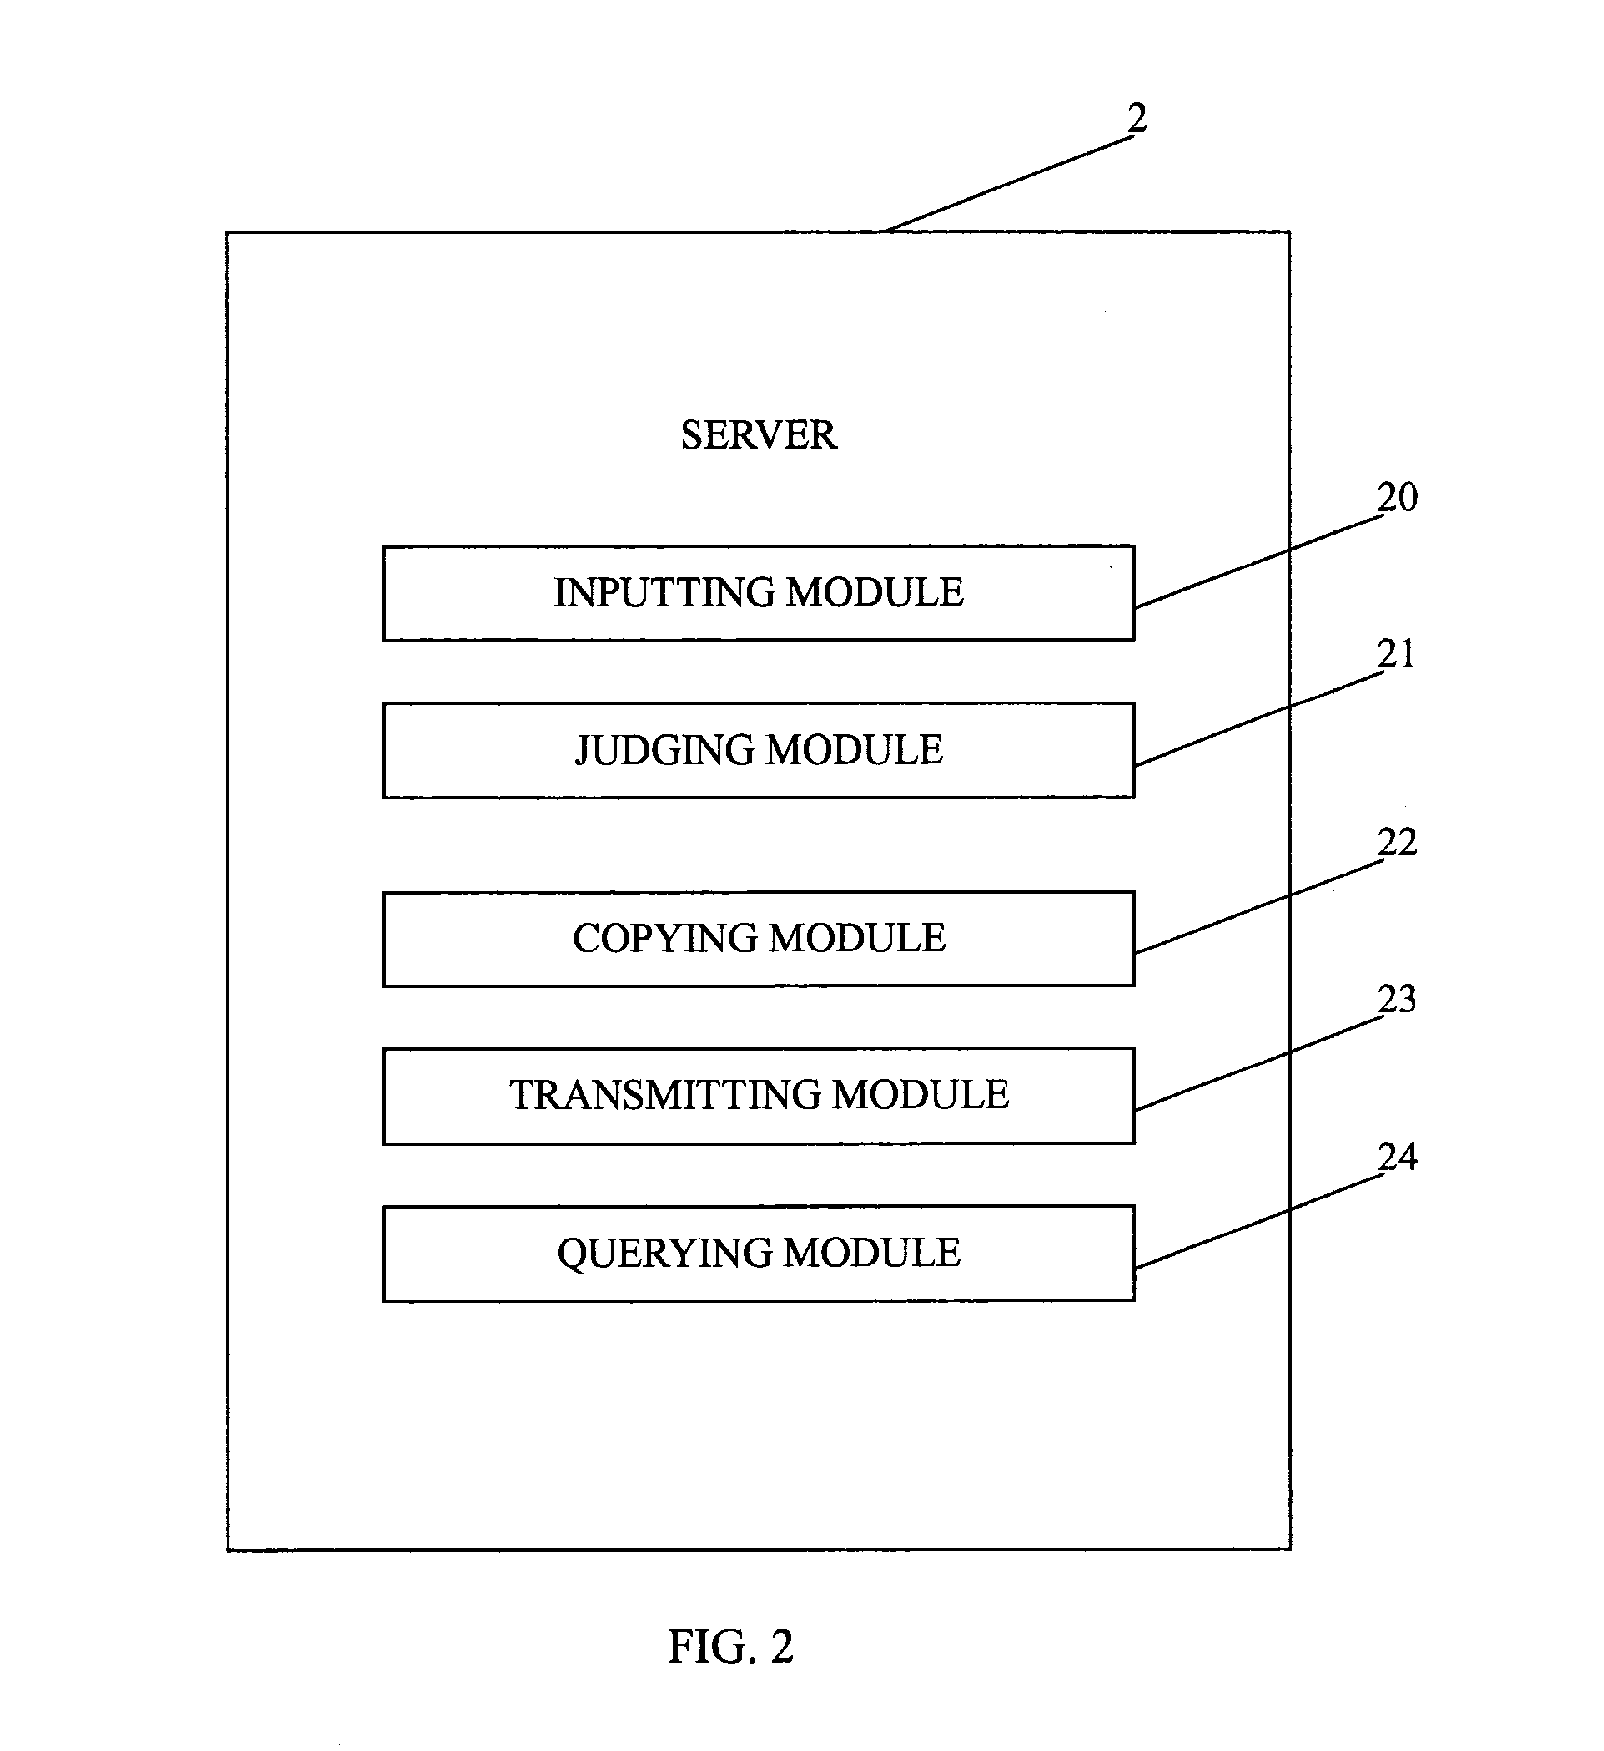 System and method for transmitting data quickly between a client and a server